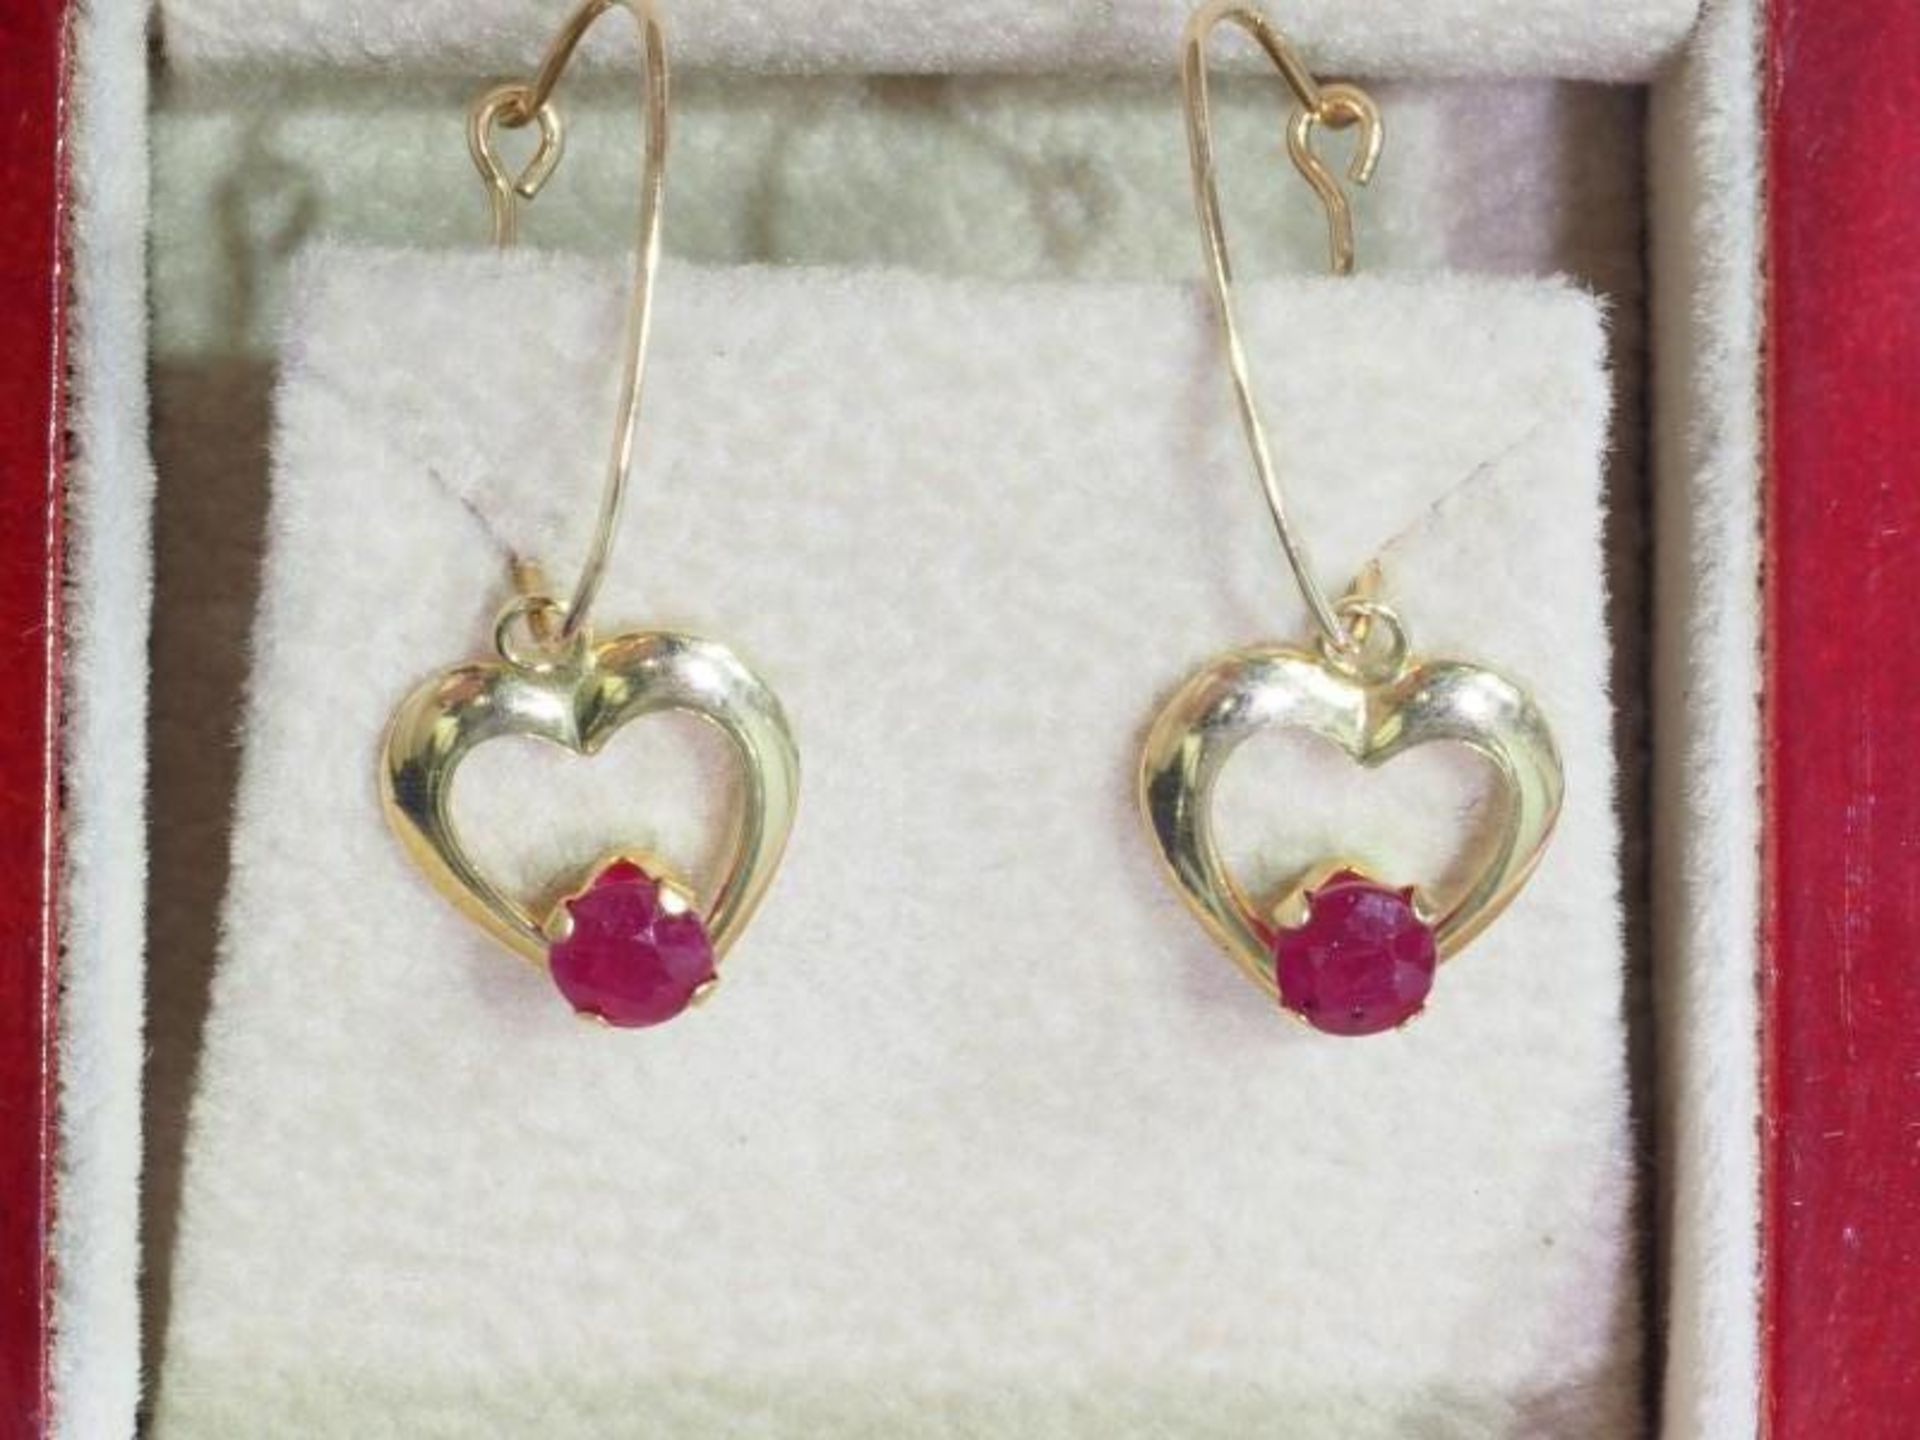 10K Gold Heart Shaped Ruby (0.70ct) Earrings. Retail $400 - Image 2 of 3